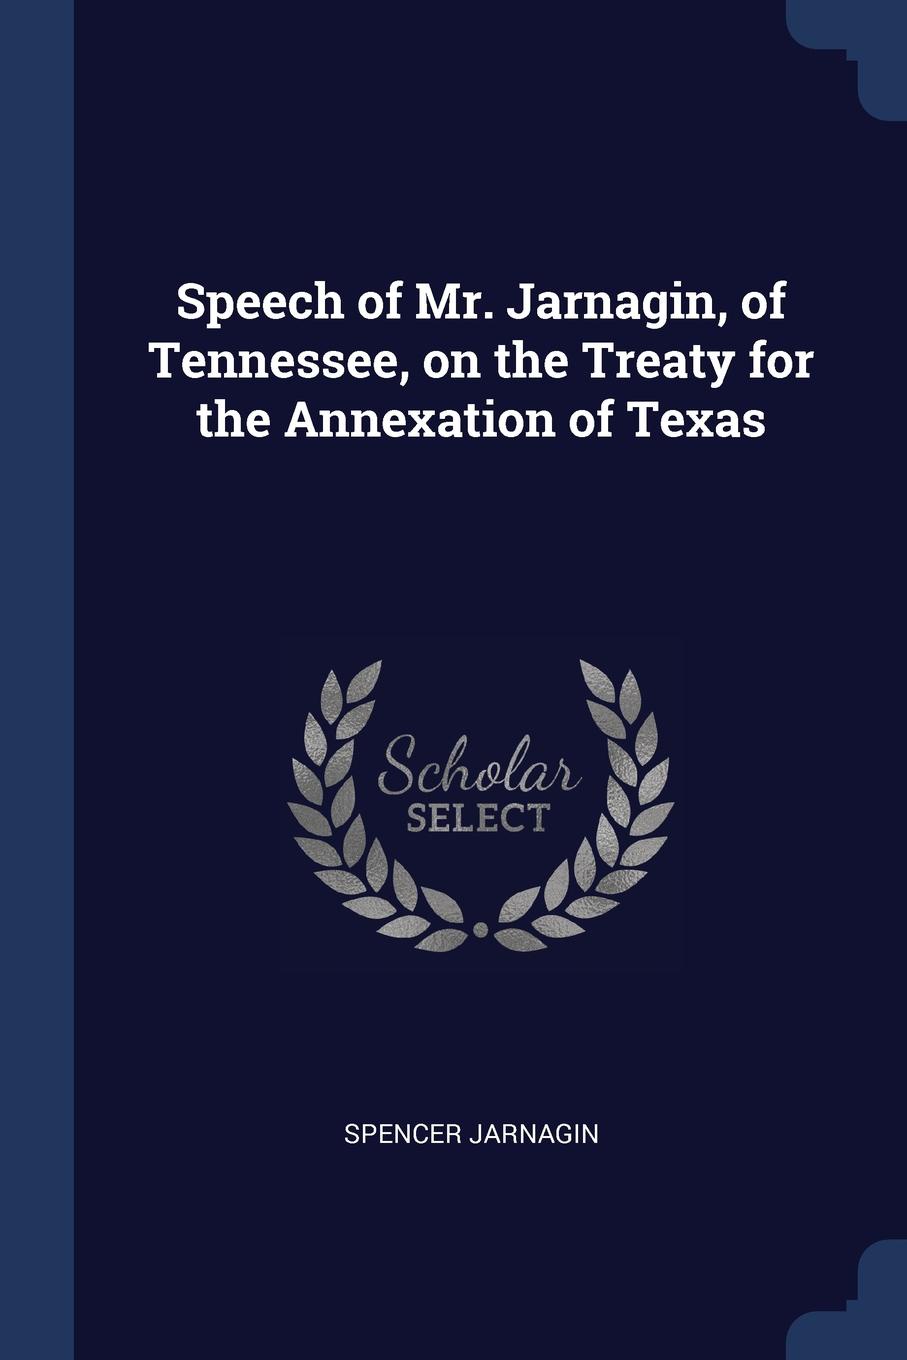 Speech of Mr. Jarnagin, of Tennessee, on the Treaty for the Annexation of Texas